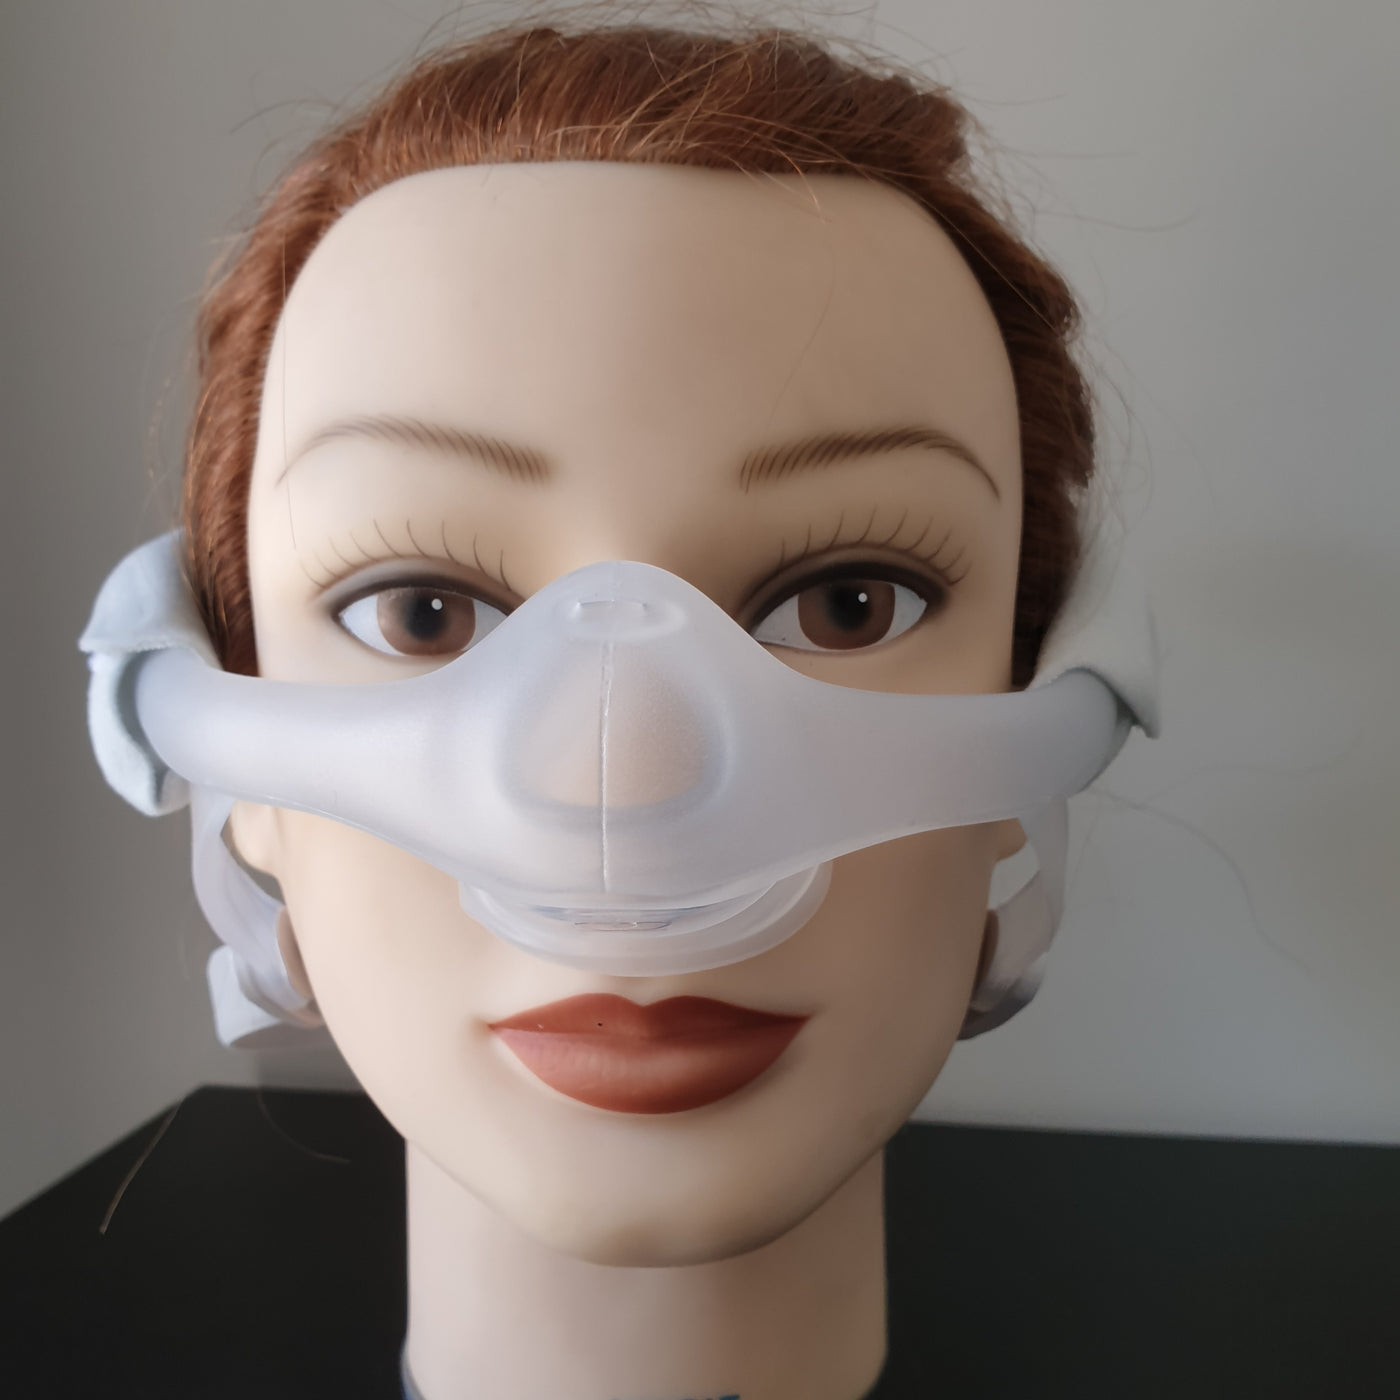 Philips Respironics Dream Wisp nasal CPAP mask with headgear